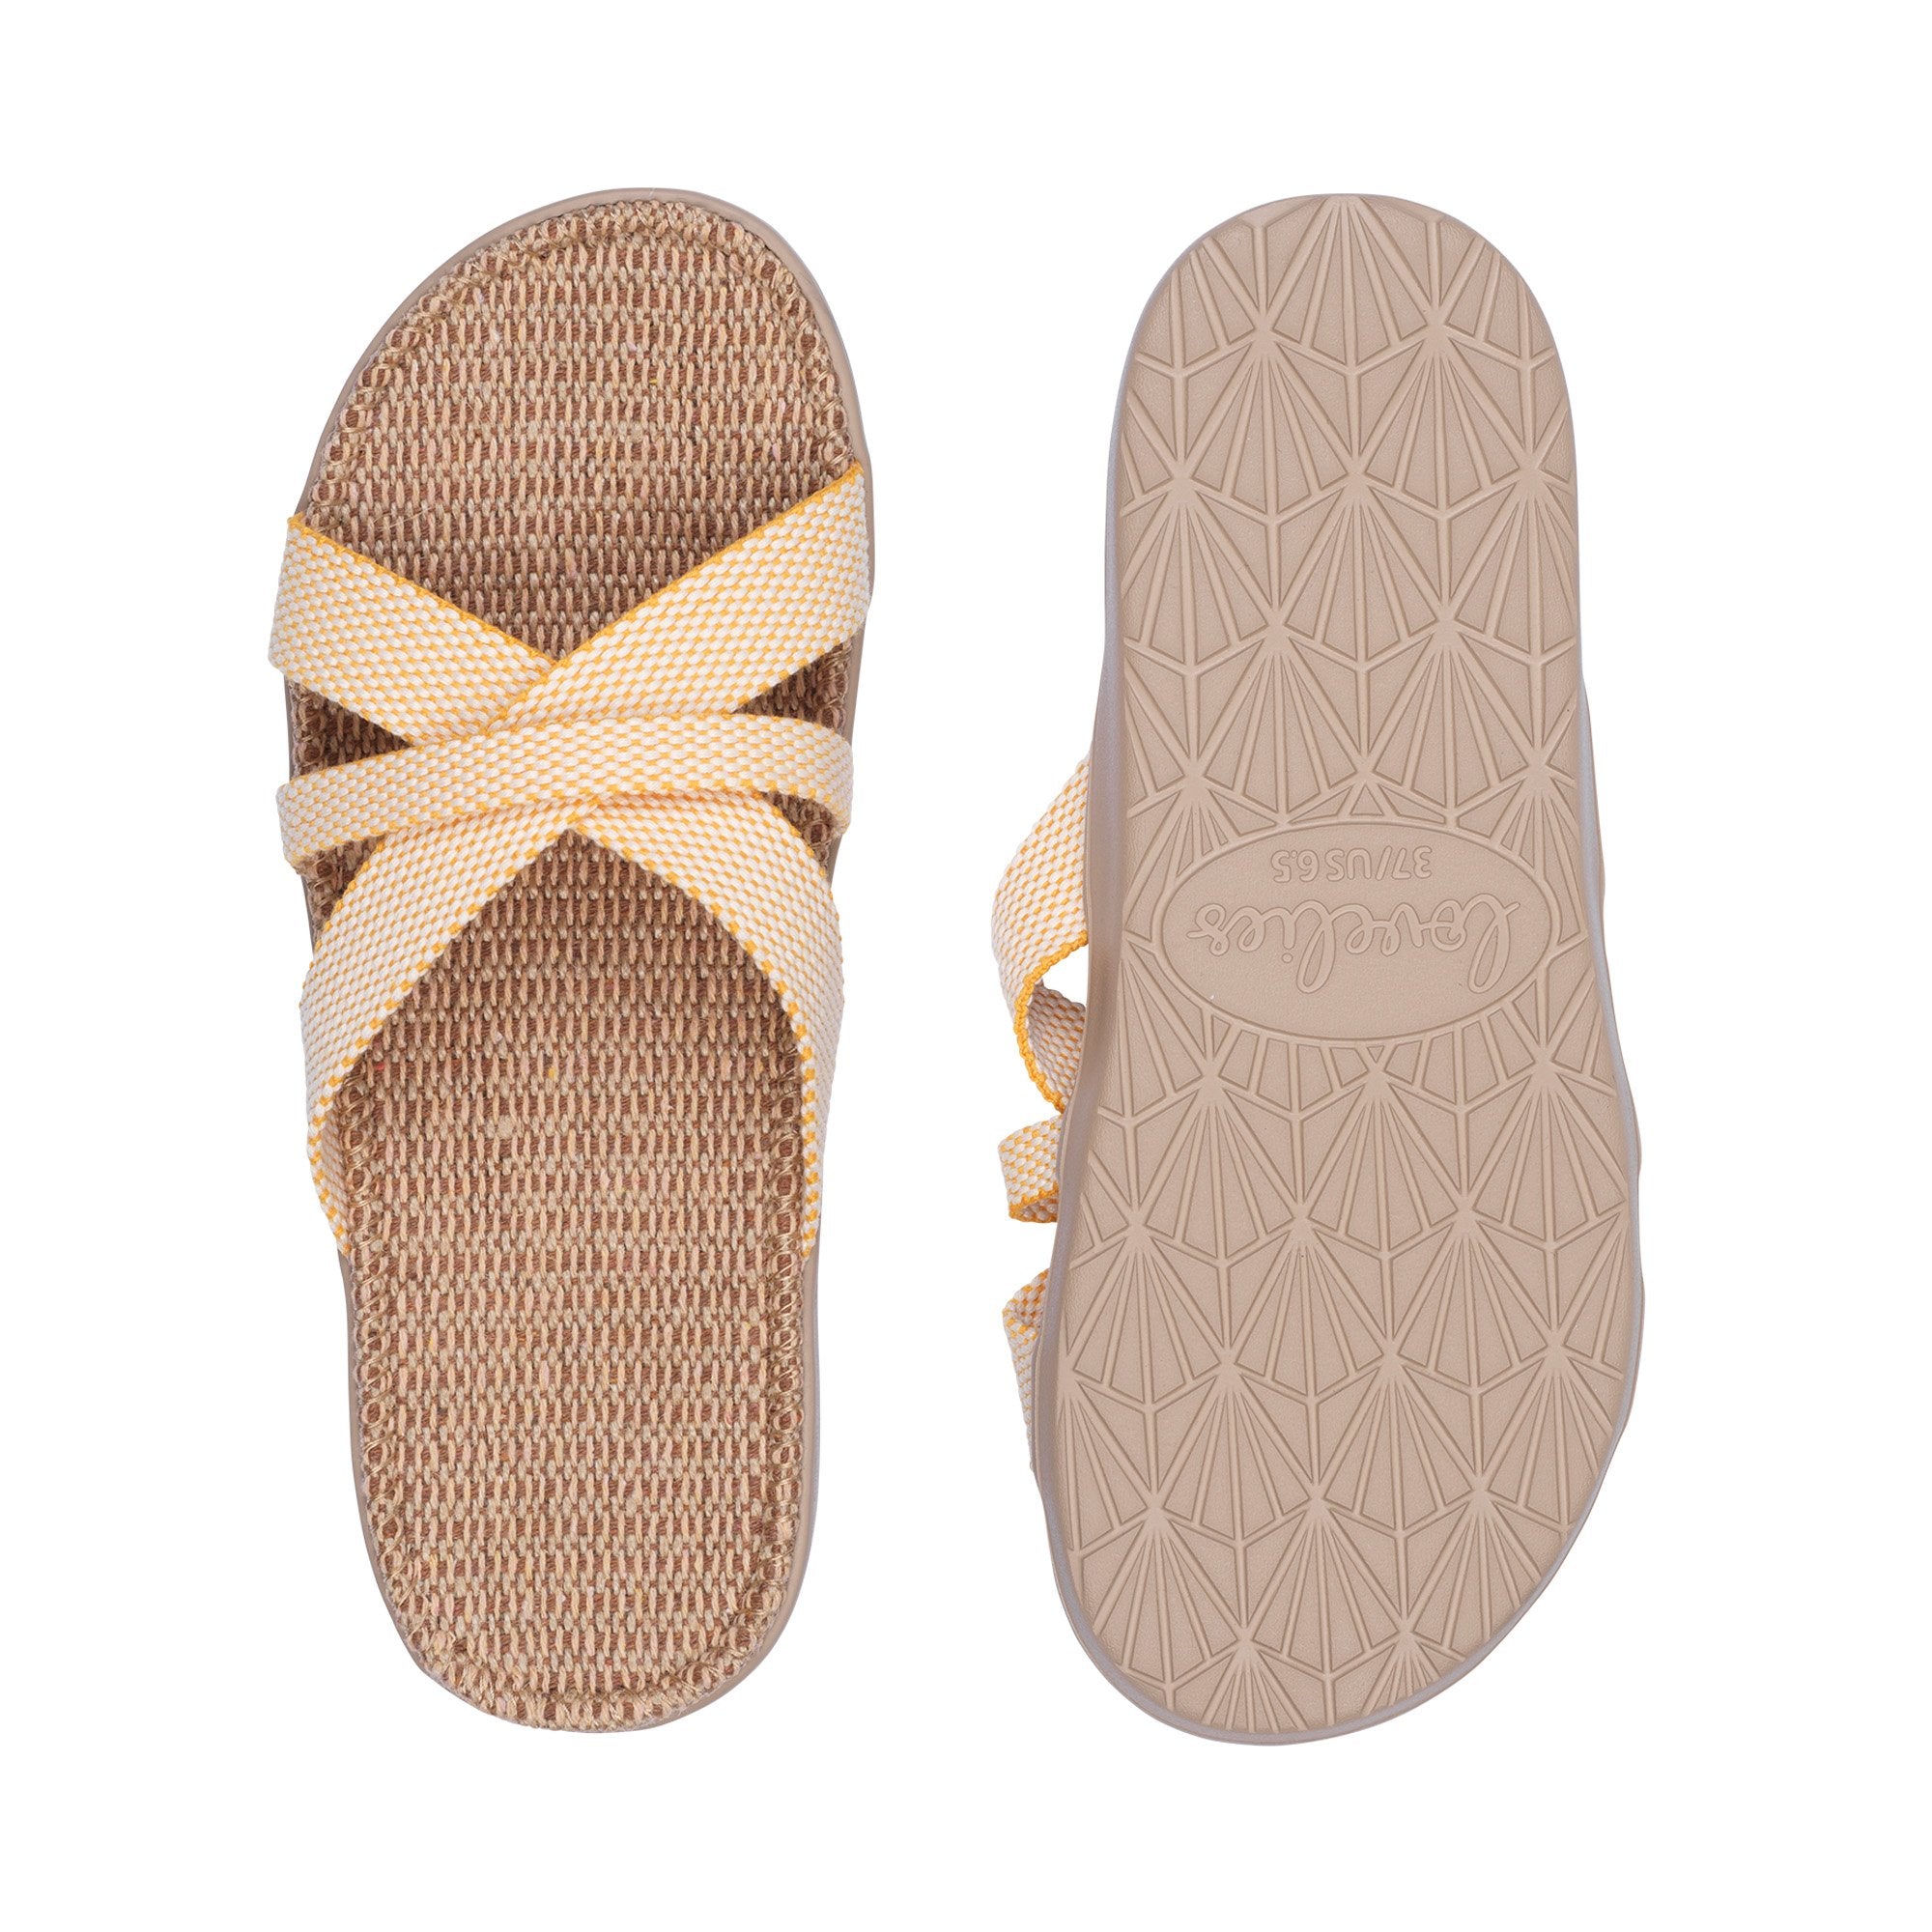 Weligama the best slip on sandal from the Danish brand Lovelies. Sandal with woven cotton straps. The comfortable inner sole is covered with soft natural jute material. The Weligama sandal is available in many beautiful colours and in sizes fra 30 to 42 euro size.